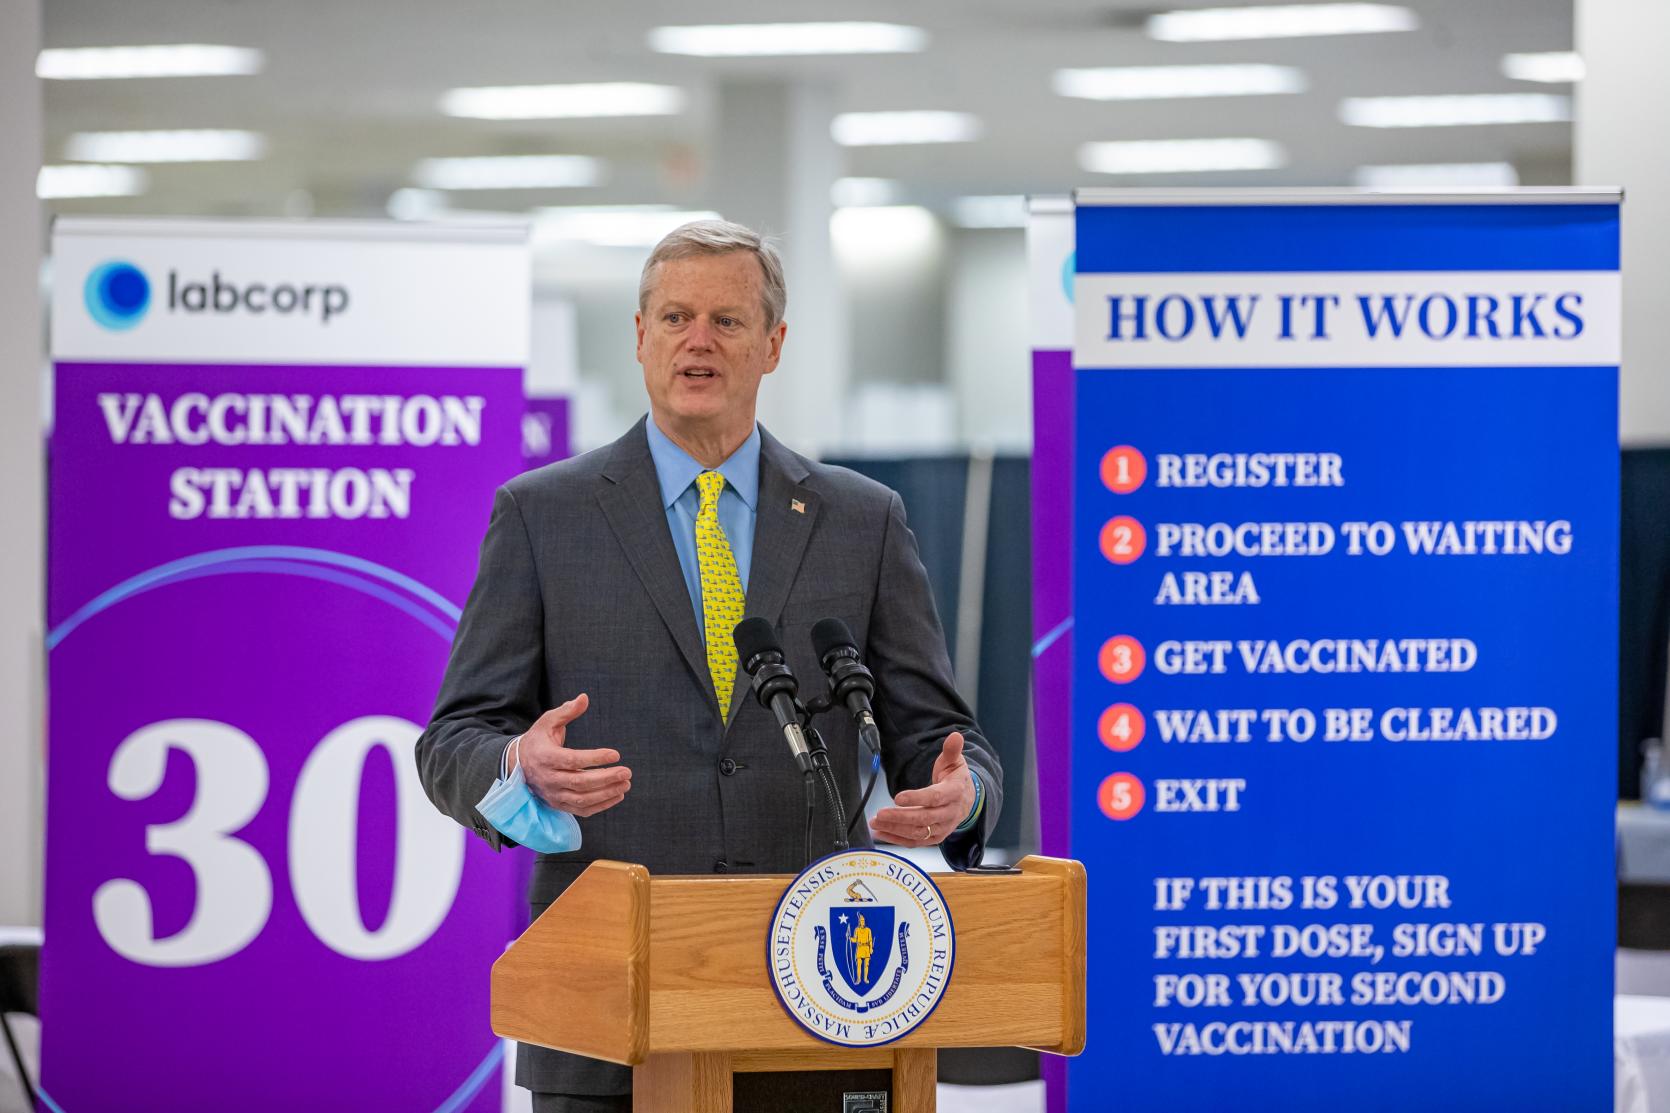 Baker-Polito Administration Announces $4.7 Million for Vaccine Equity in Hardest-Hit Communities; Regional Vaccination Collaboratives